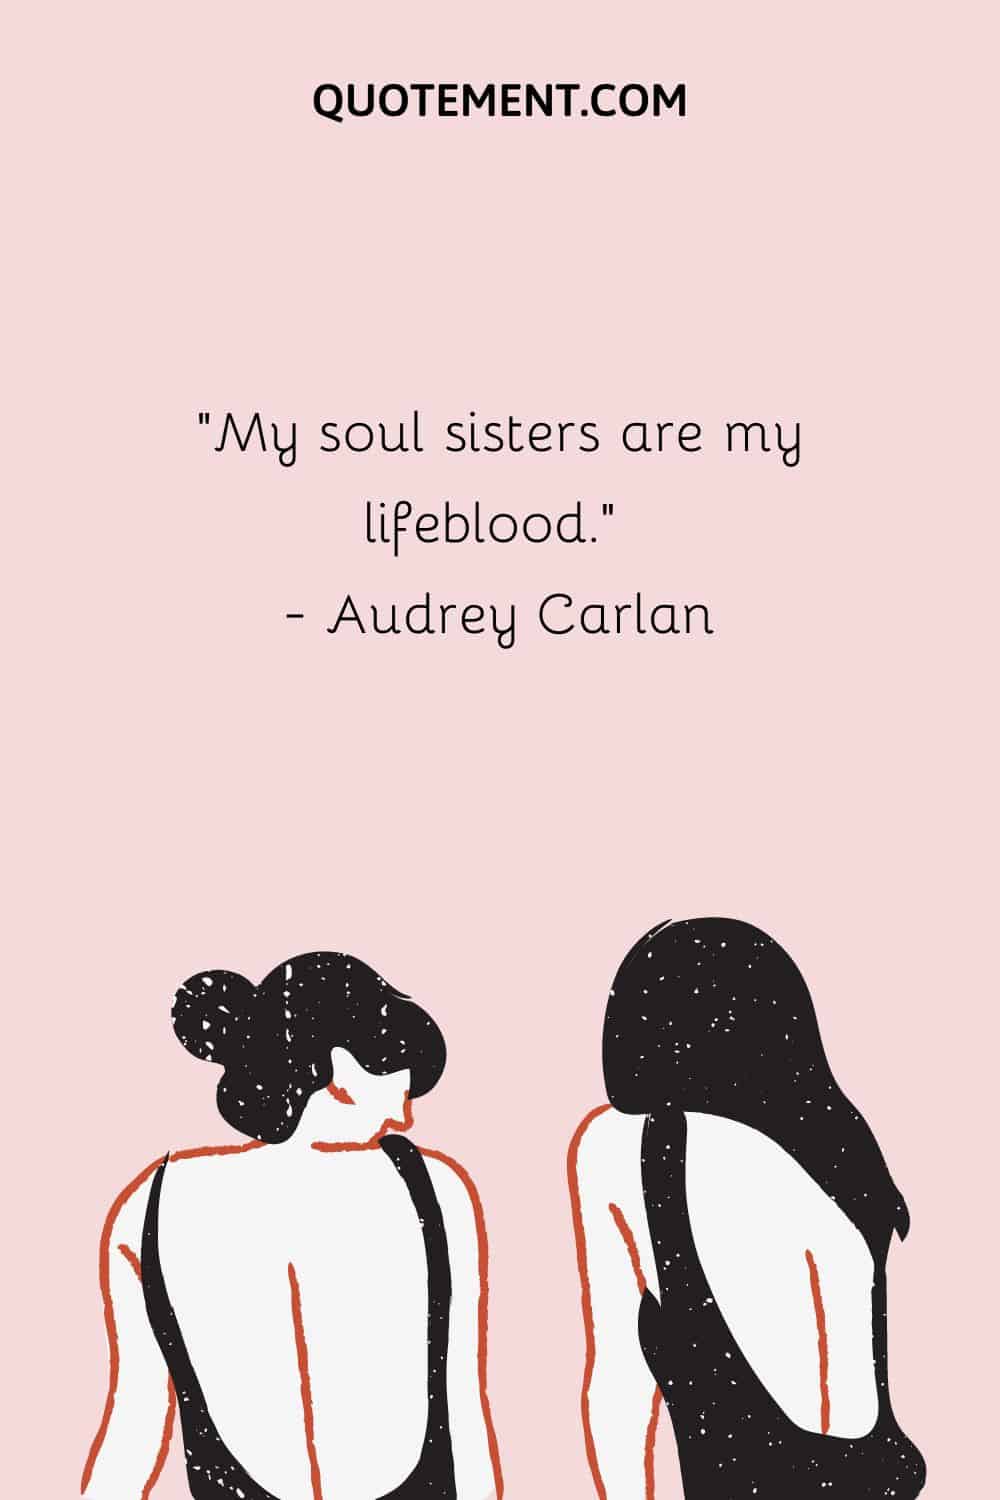 My soul sisters are my lifeblood